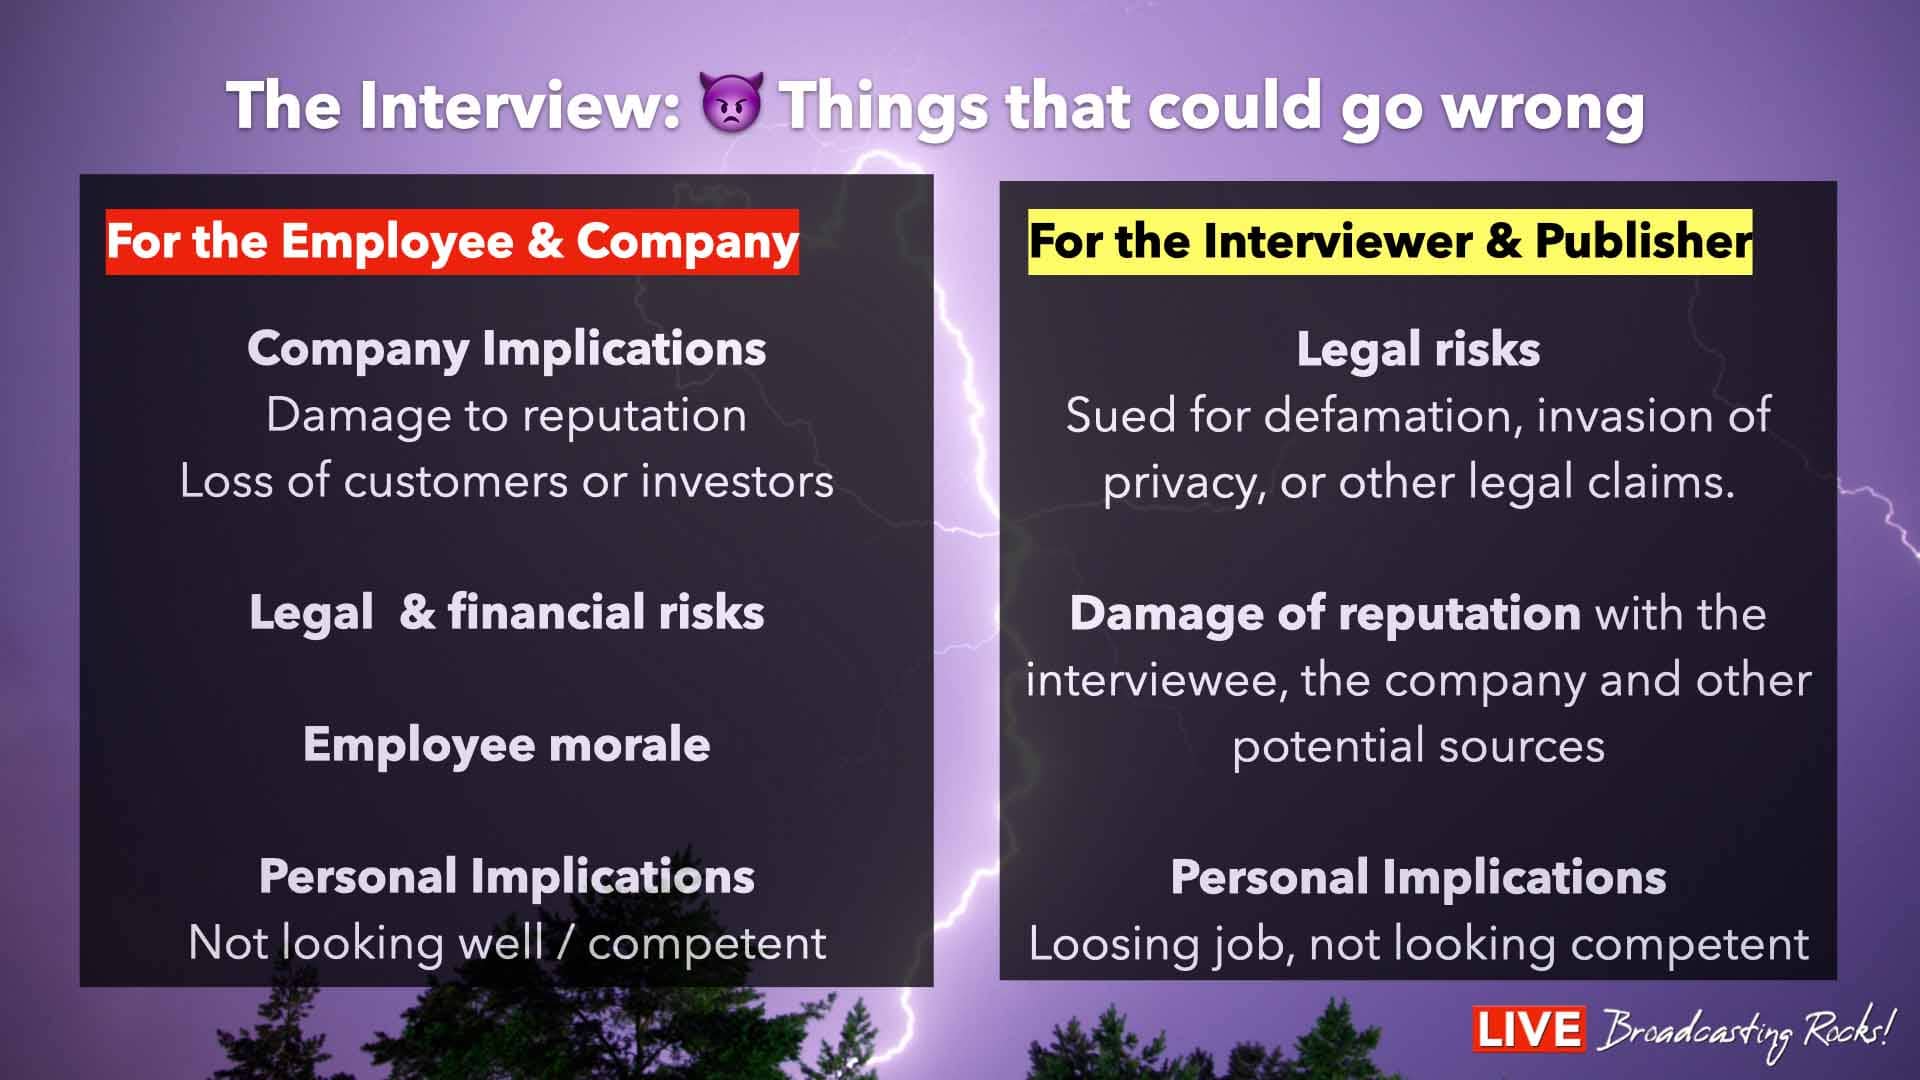 When an interview goes wrong, it can also pose several risks for a company and the journalist. Here are some of the potential risks